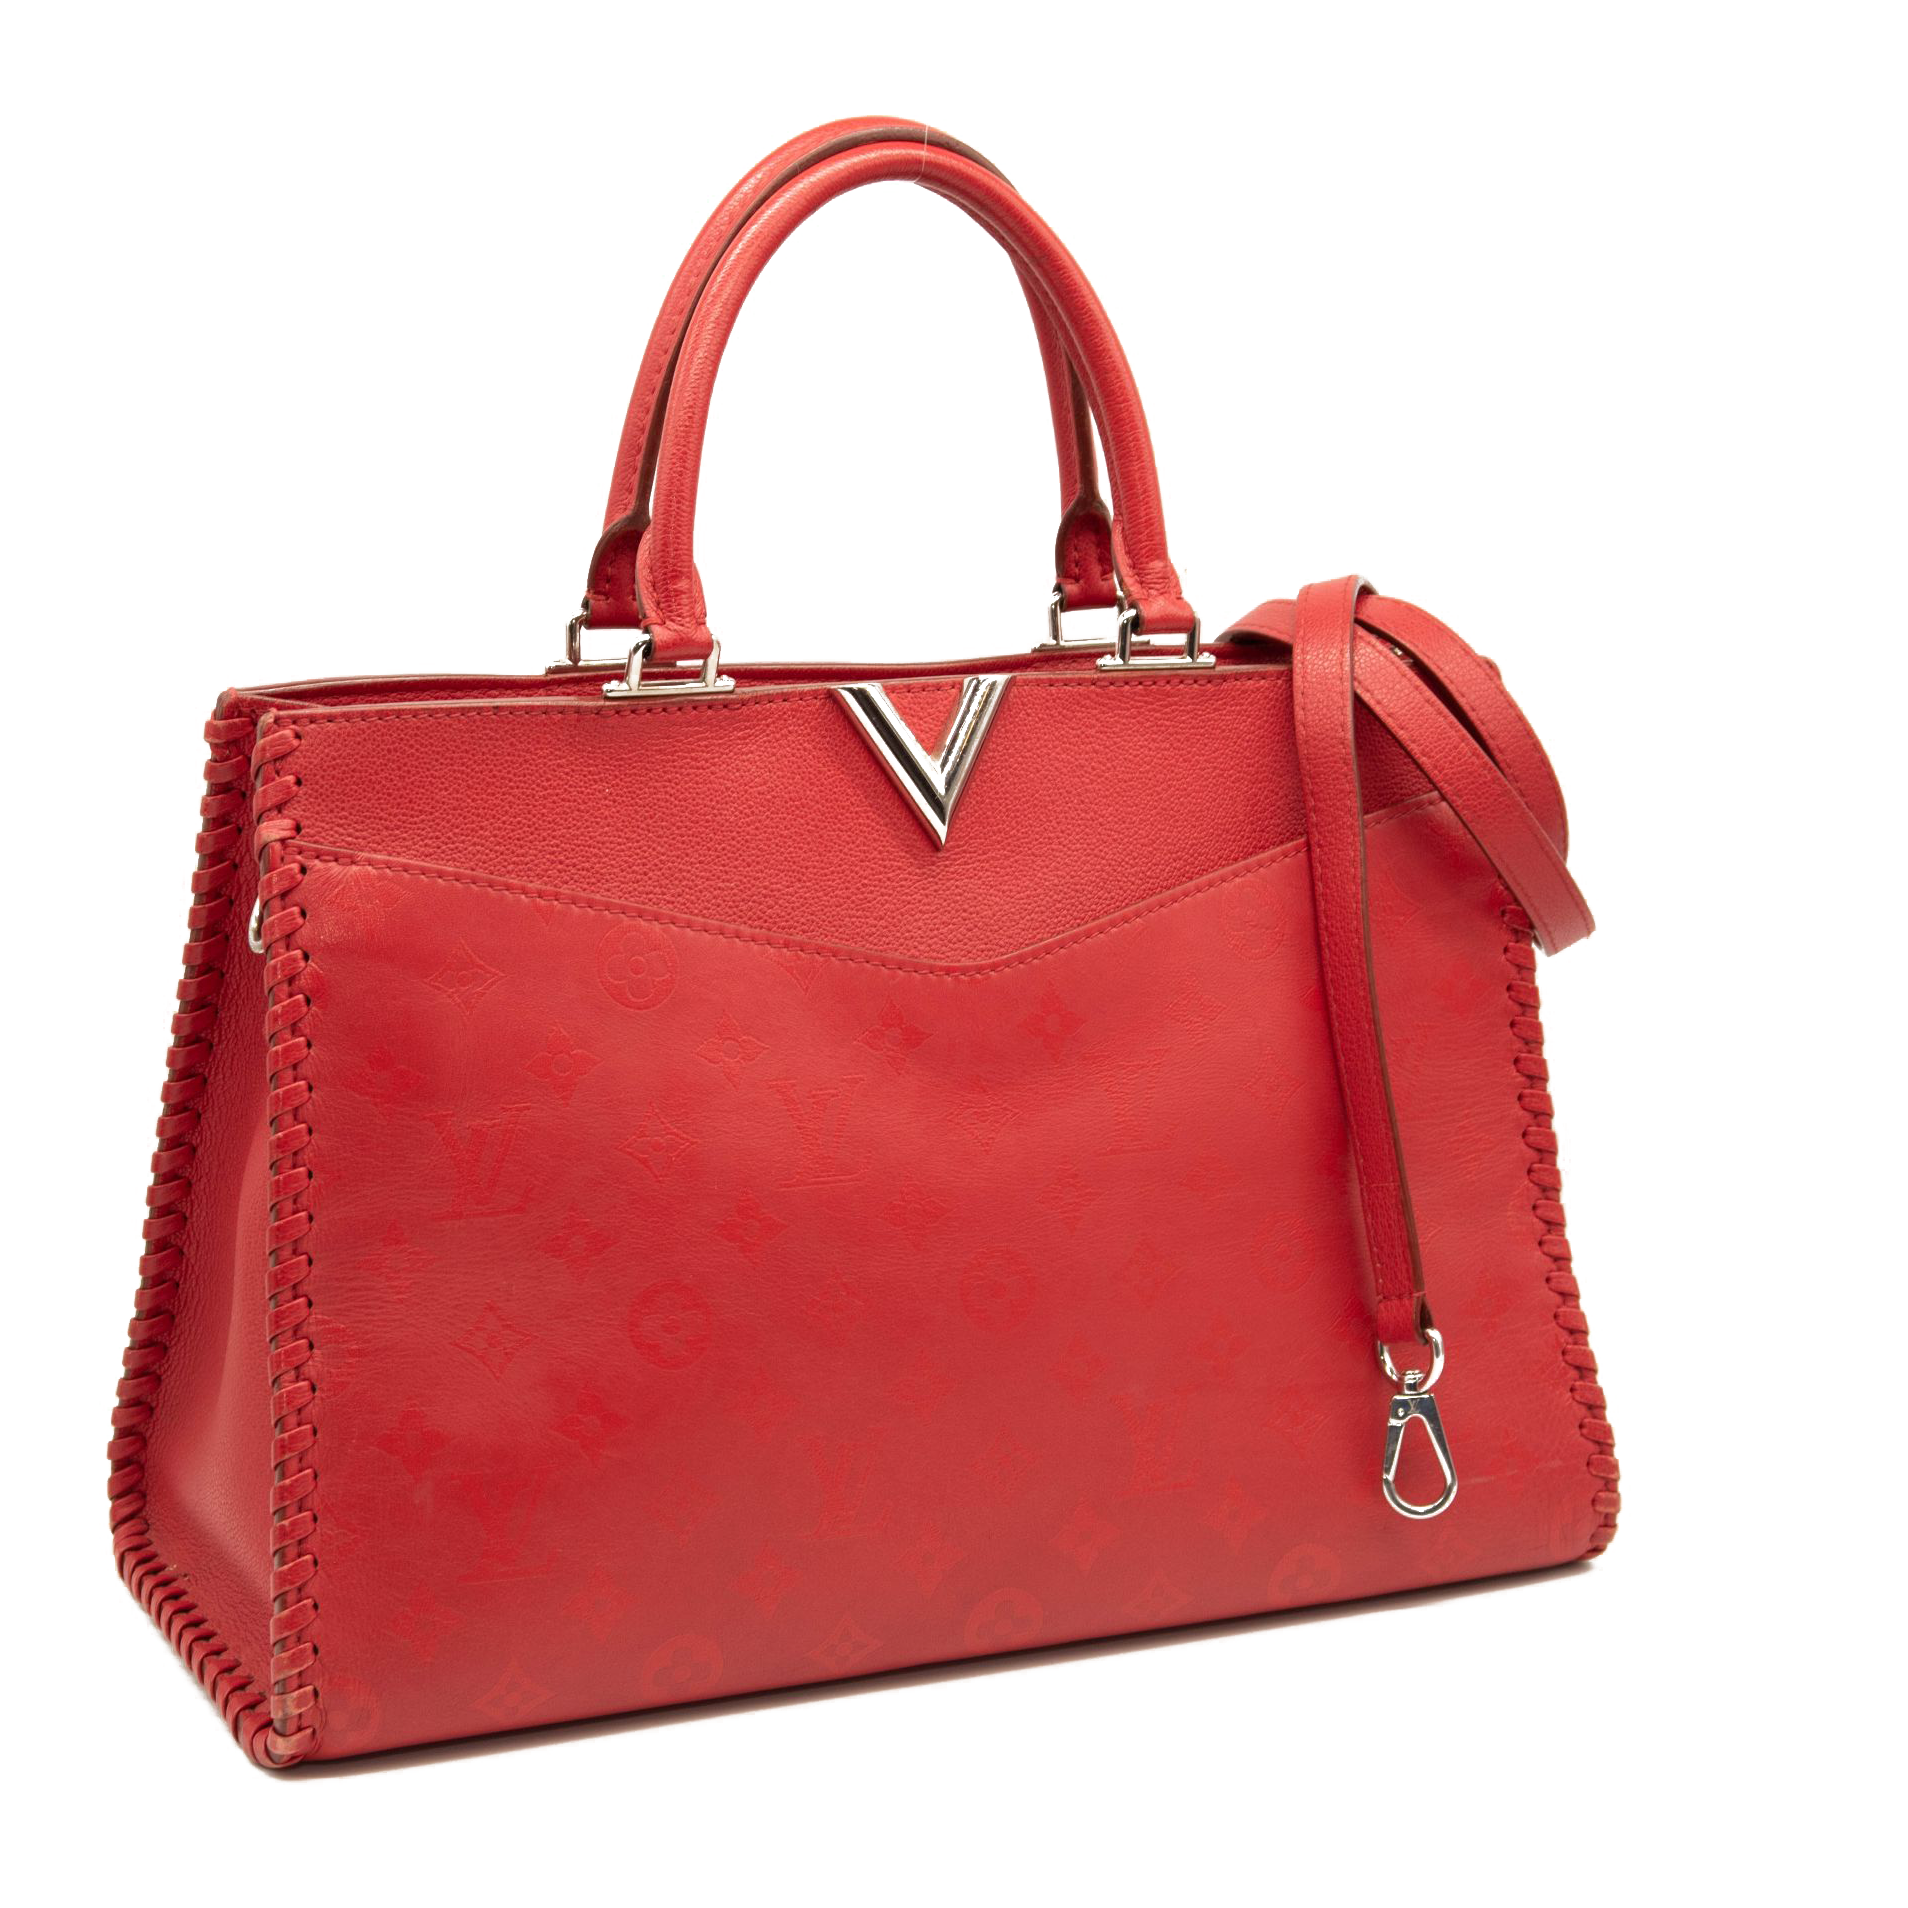 Louis Vuitton Very One Handle Bag Monogram Leather Red